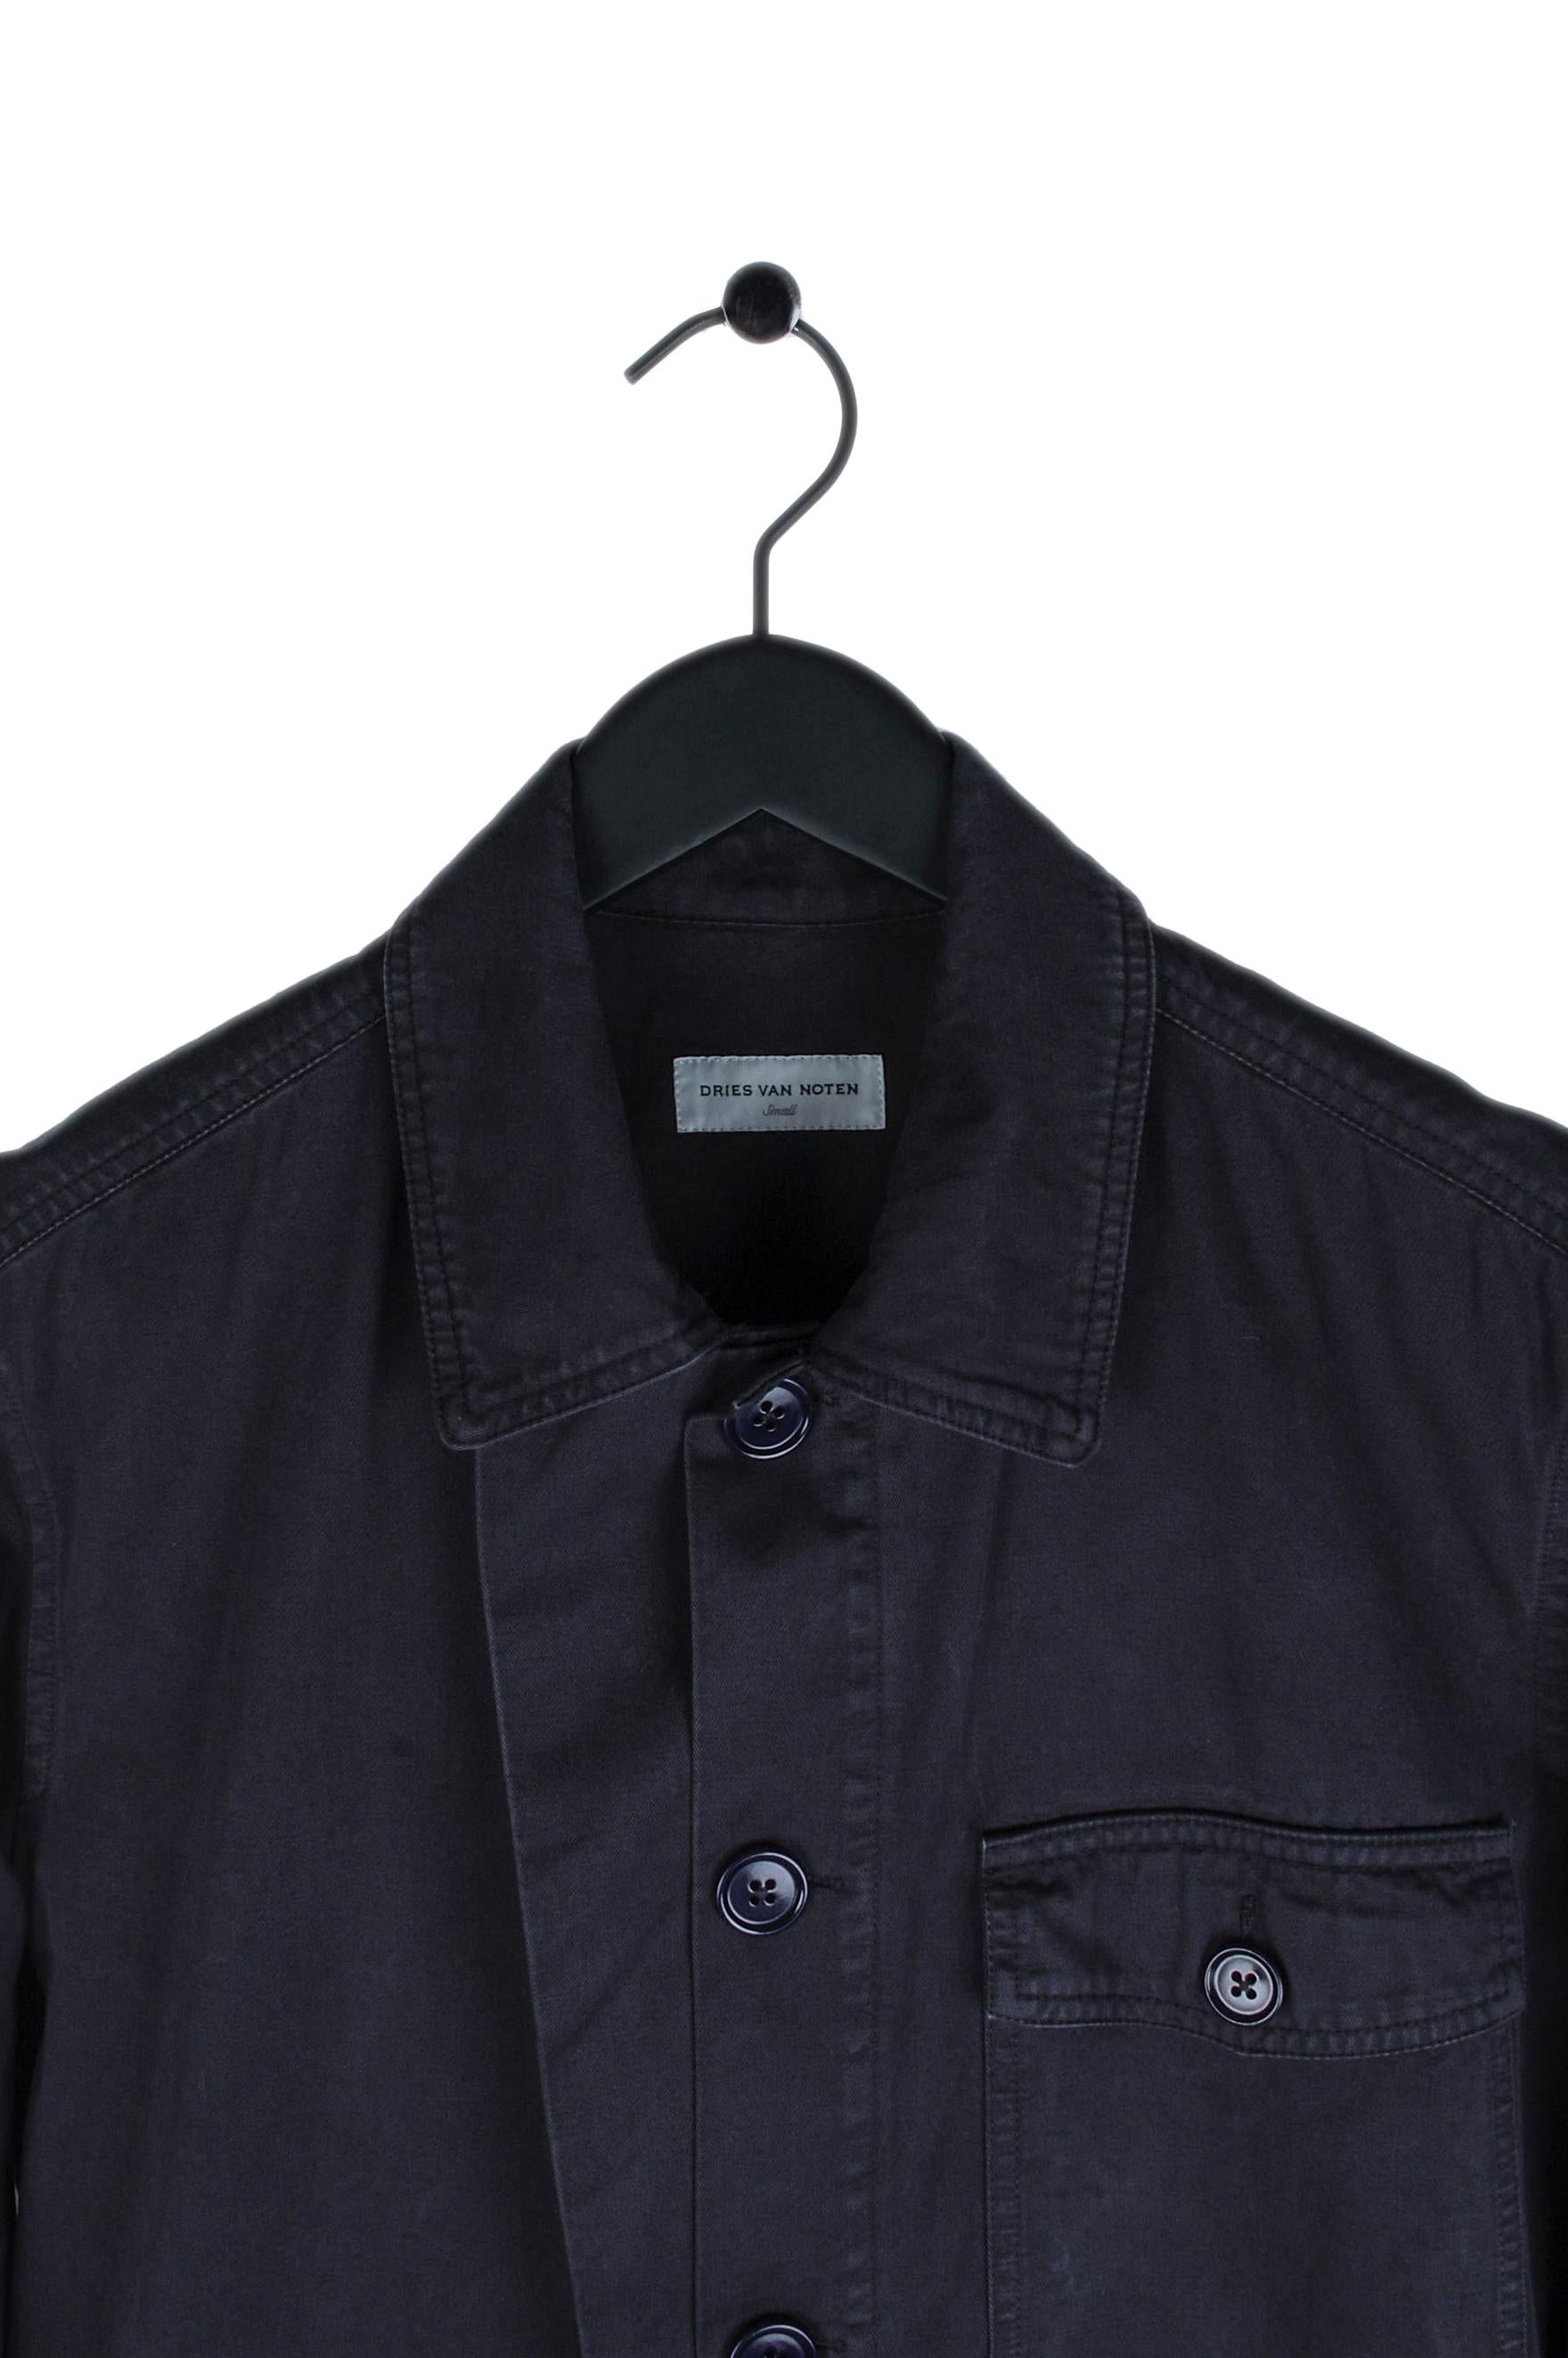 Item for sale is 100% genuine Dries Van Noten Overall 
Color: Navy
(An actual color may a bit vary due to individual computer screen interpretation)
Material: 100% cotton
Tag size: S runs for tall men
This jacket is great quality item. Rate 8.5 of